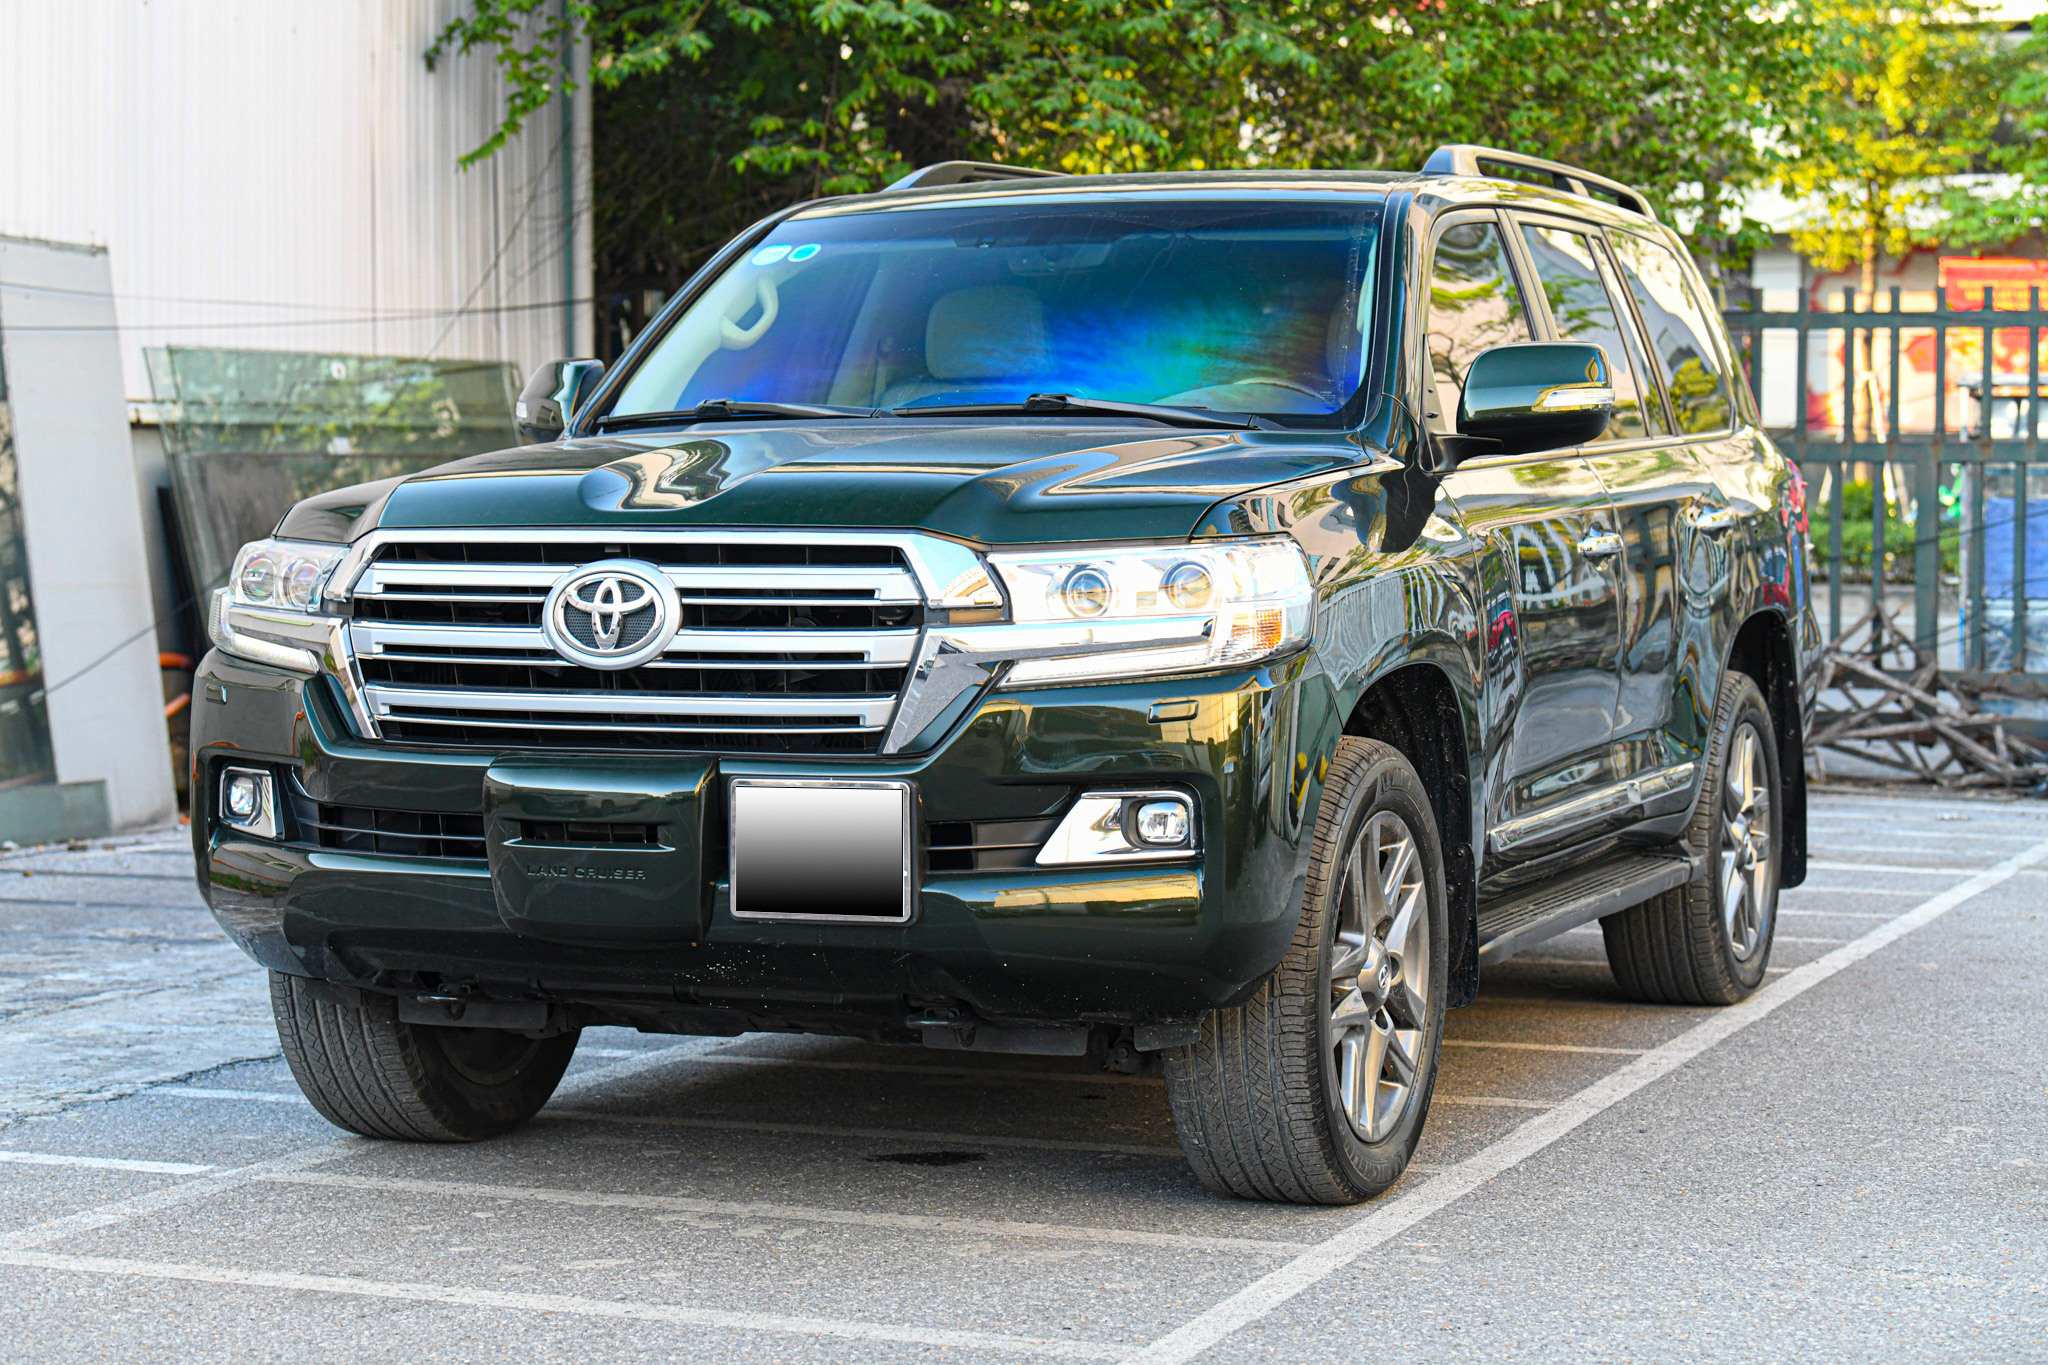 Used 2016 Toyota Land Cruiser for Sale in Colorado Springs CO  Edmunds